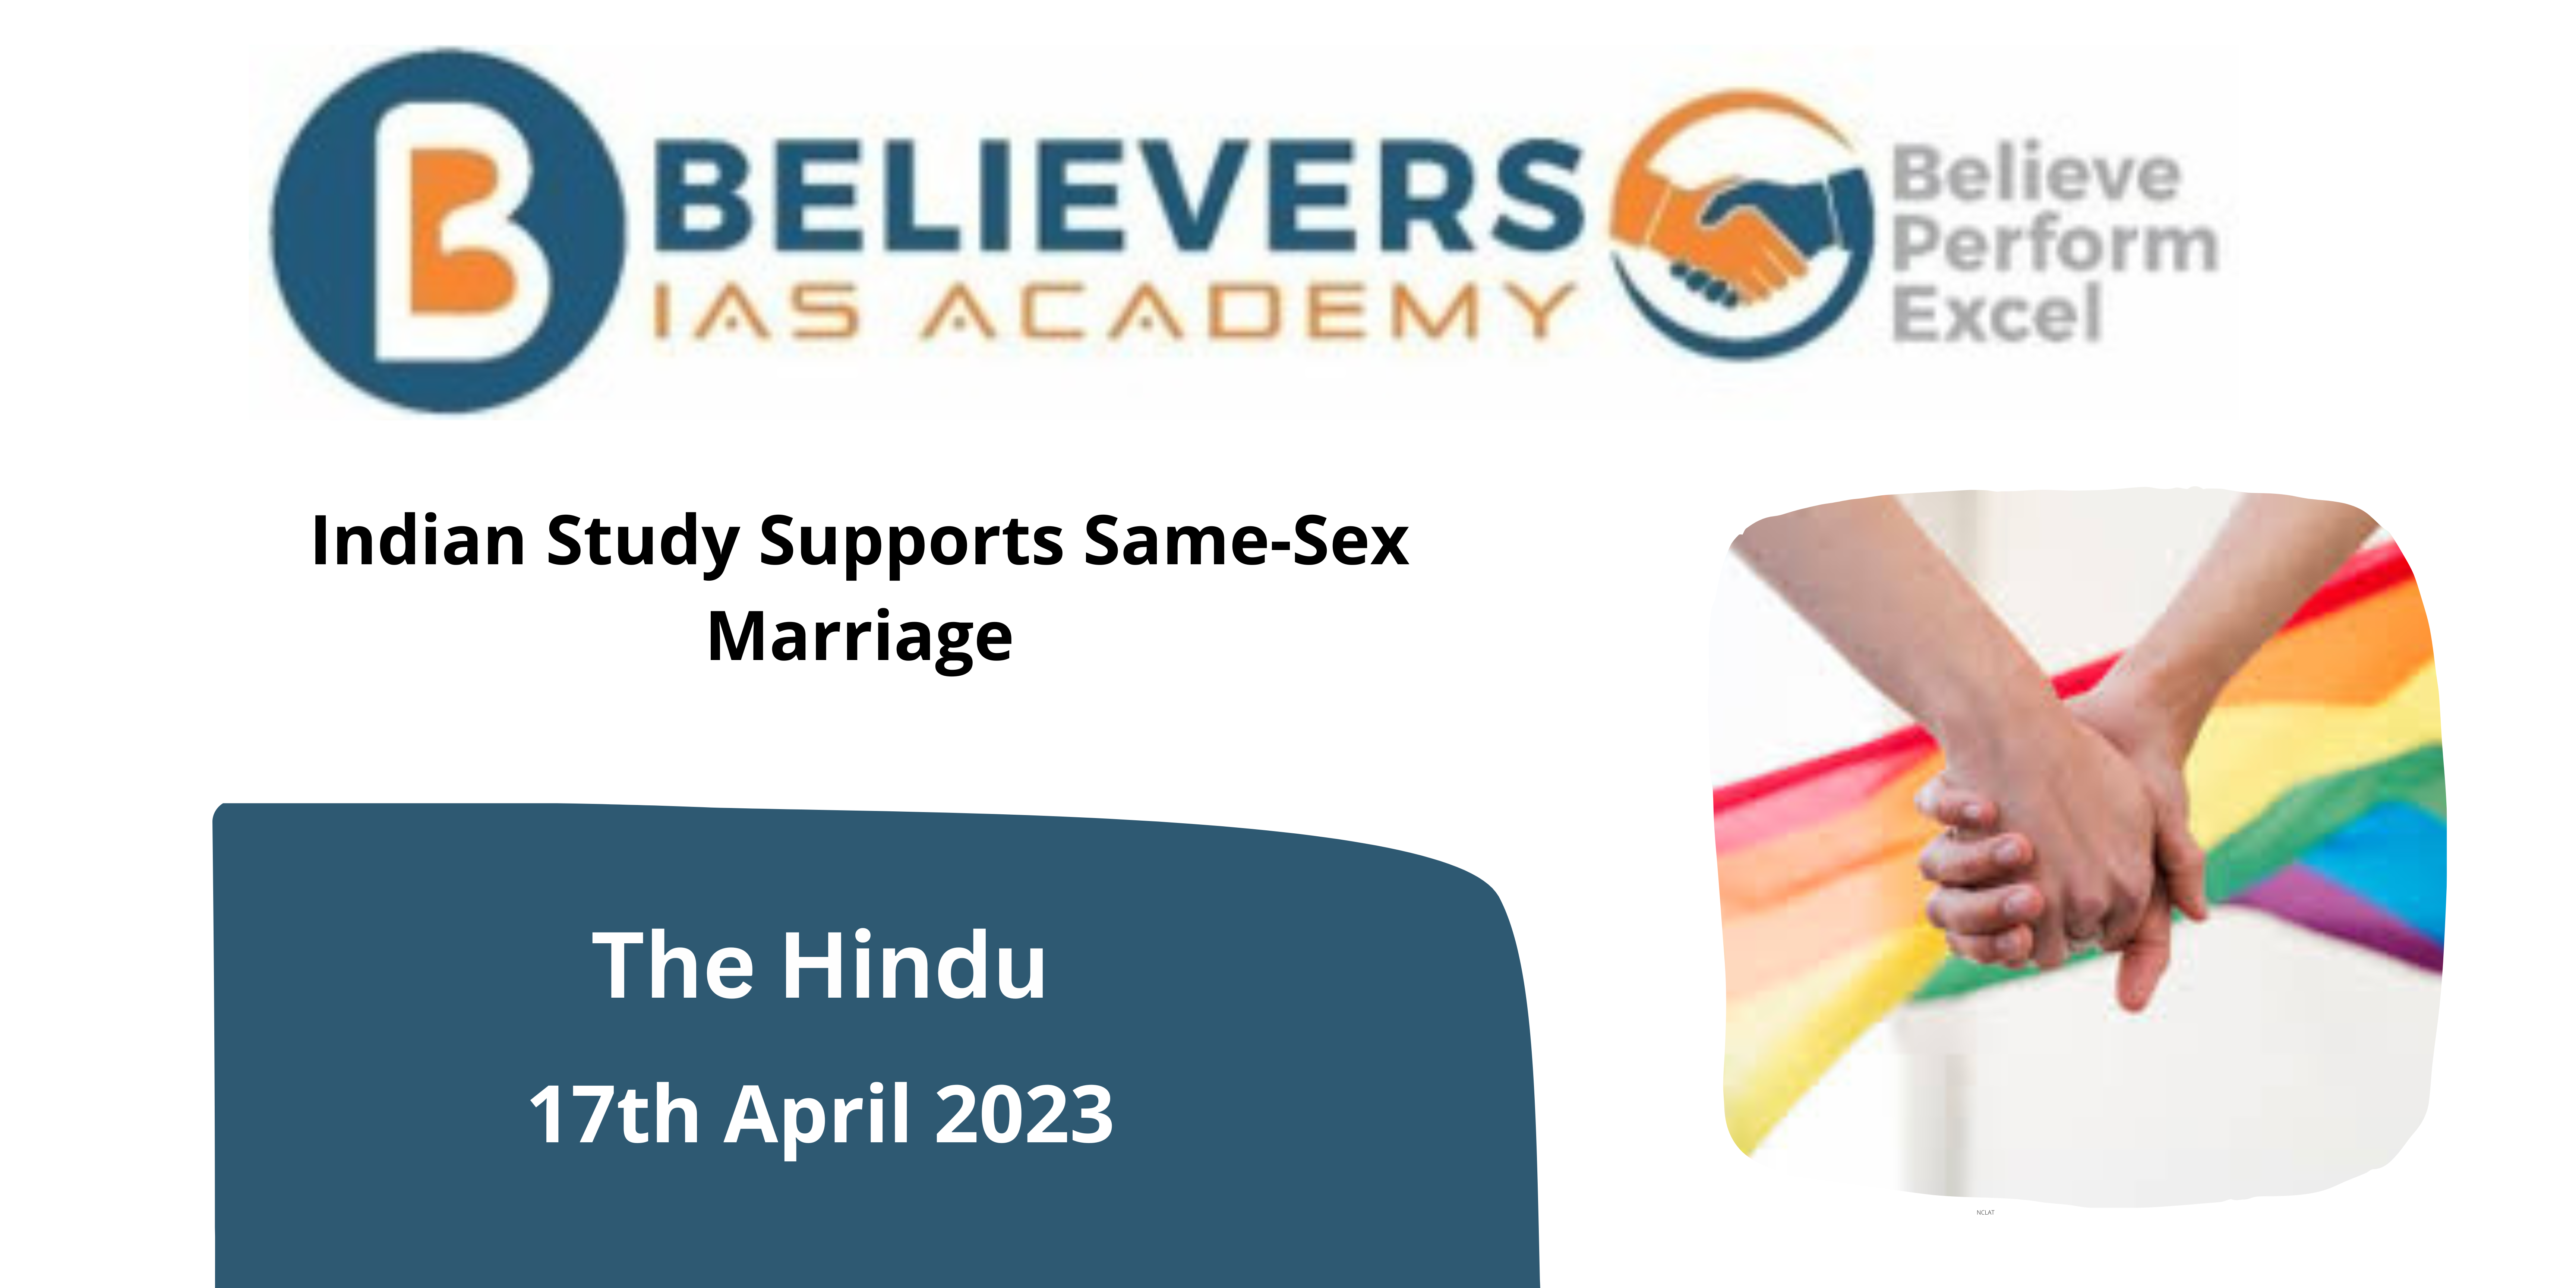 Indian Study Supports Same-Sex Marriage